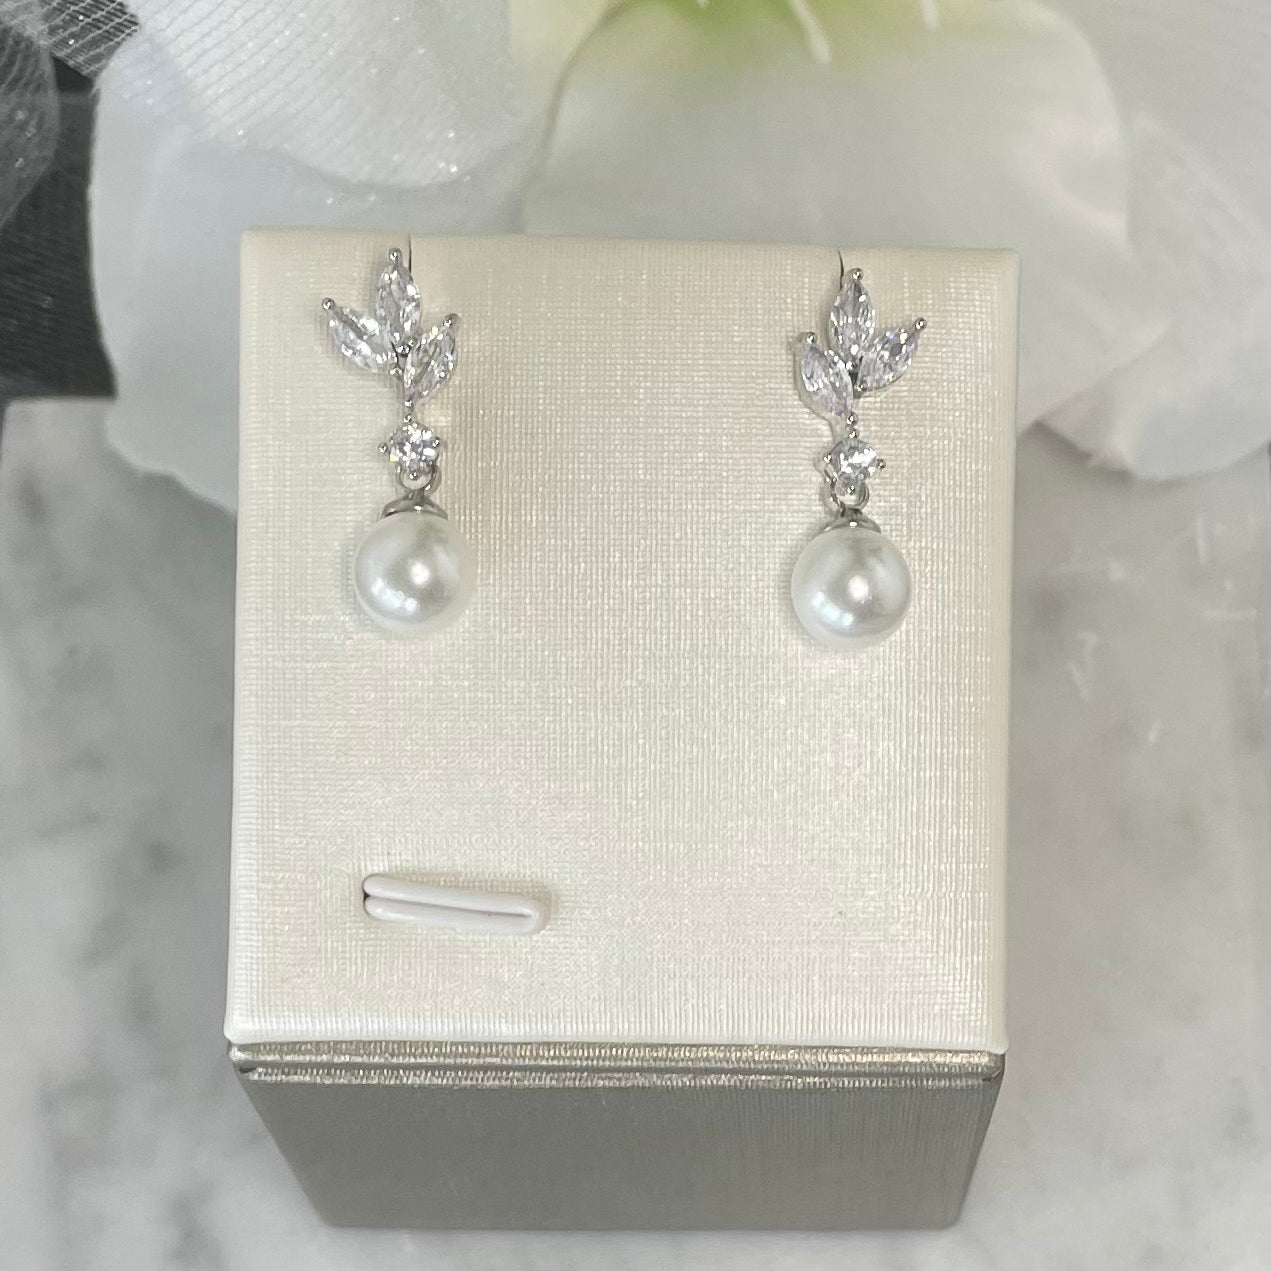 Selena leaf-design earrings with crystal embellishments and a dangling pearl accent.